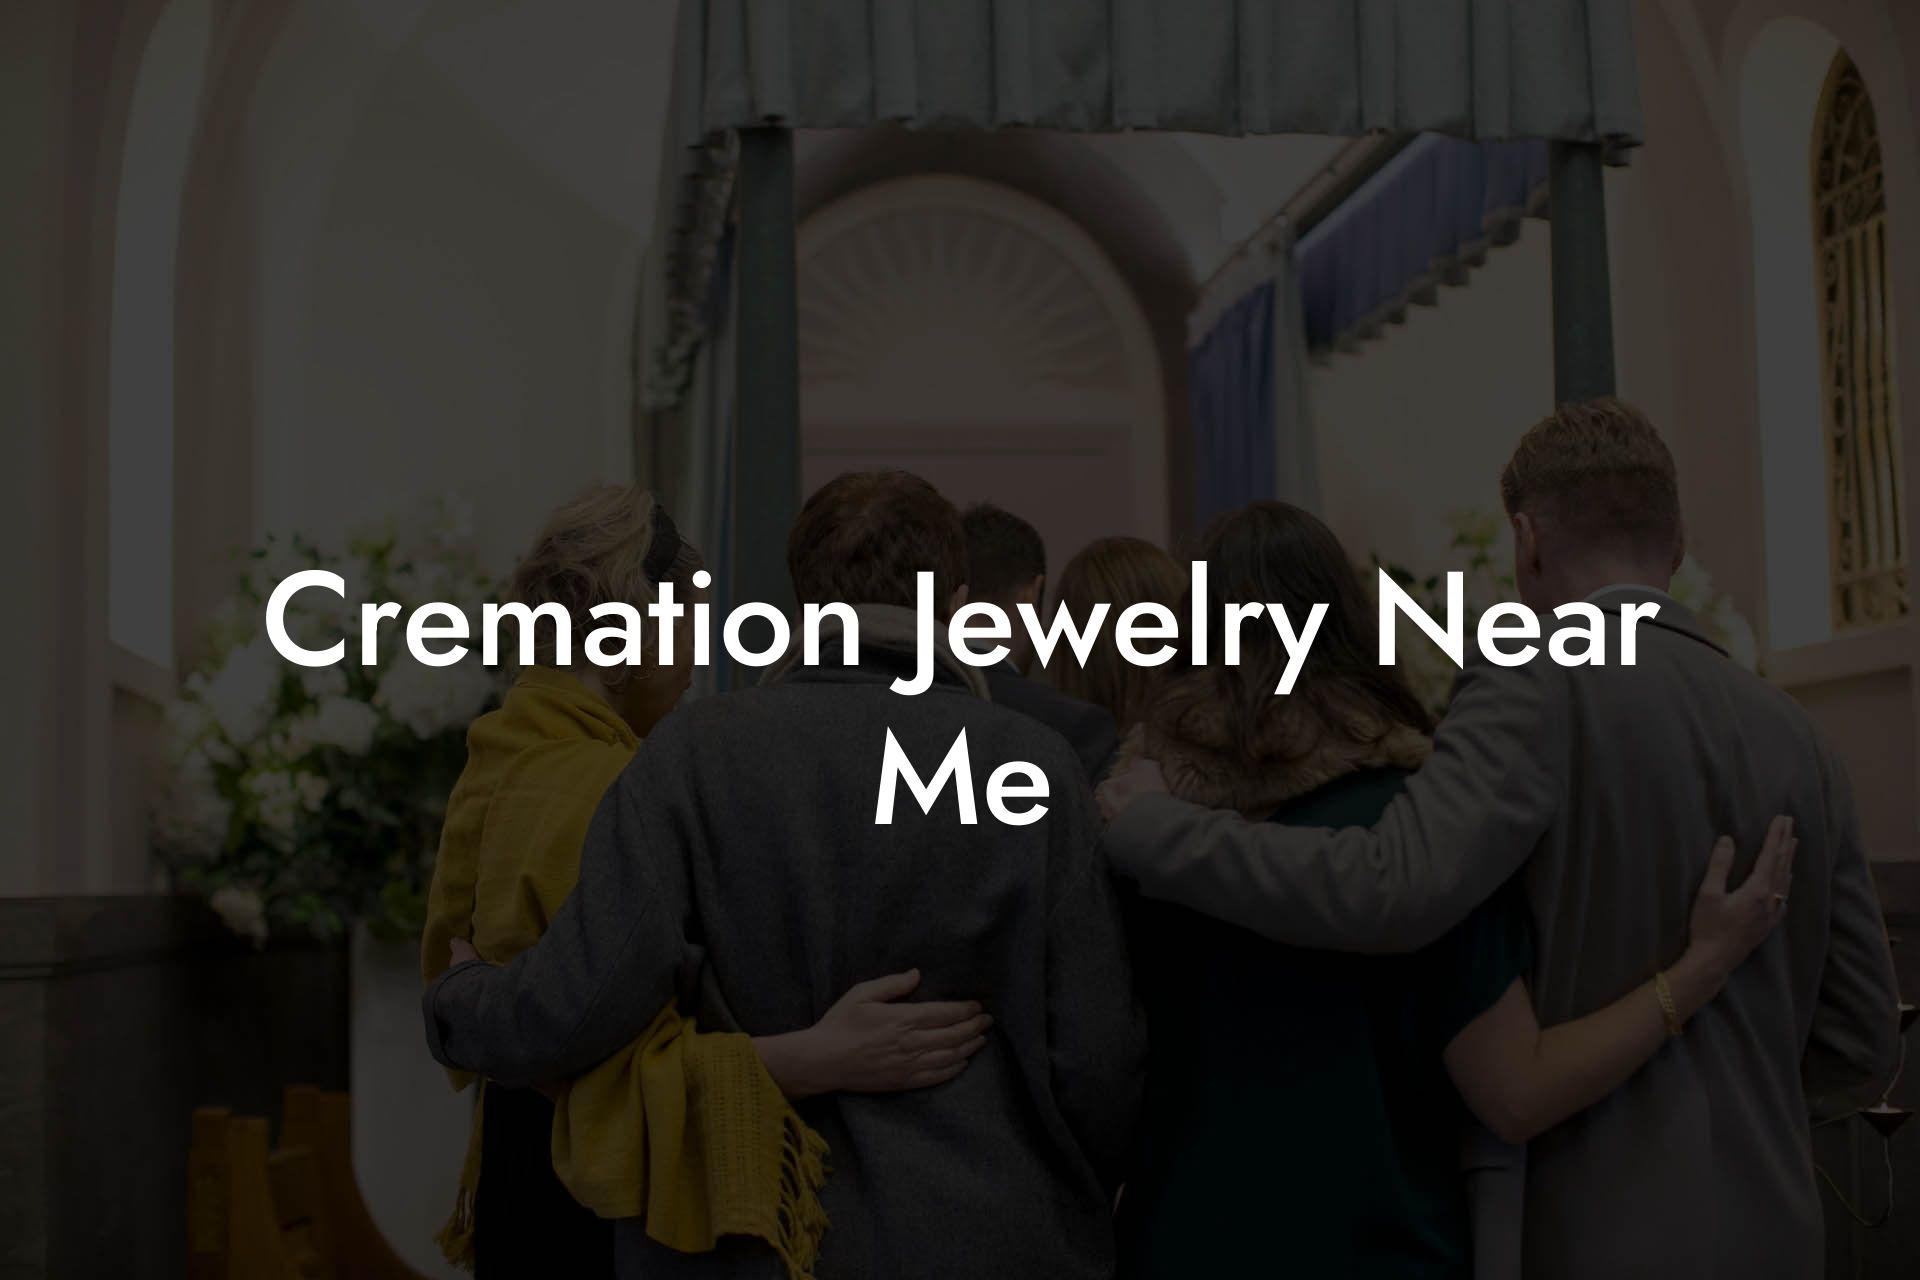 Cremation Jewelry Near Me